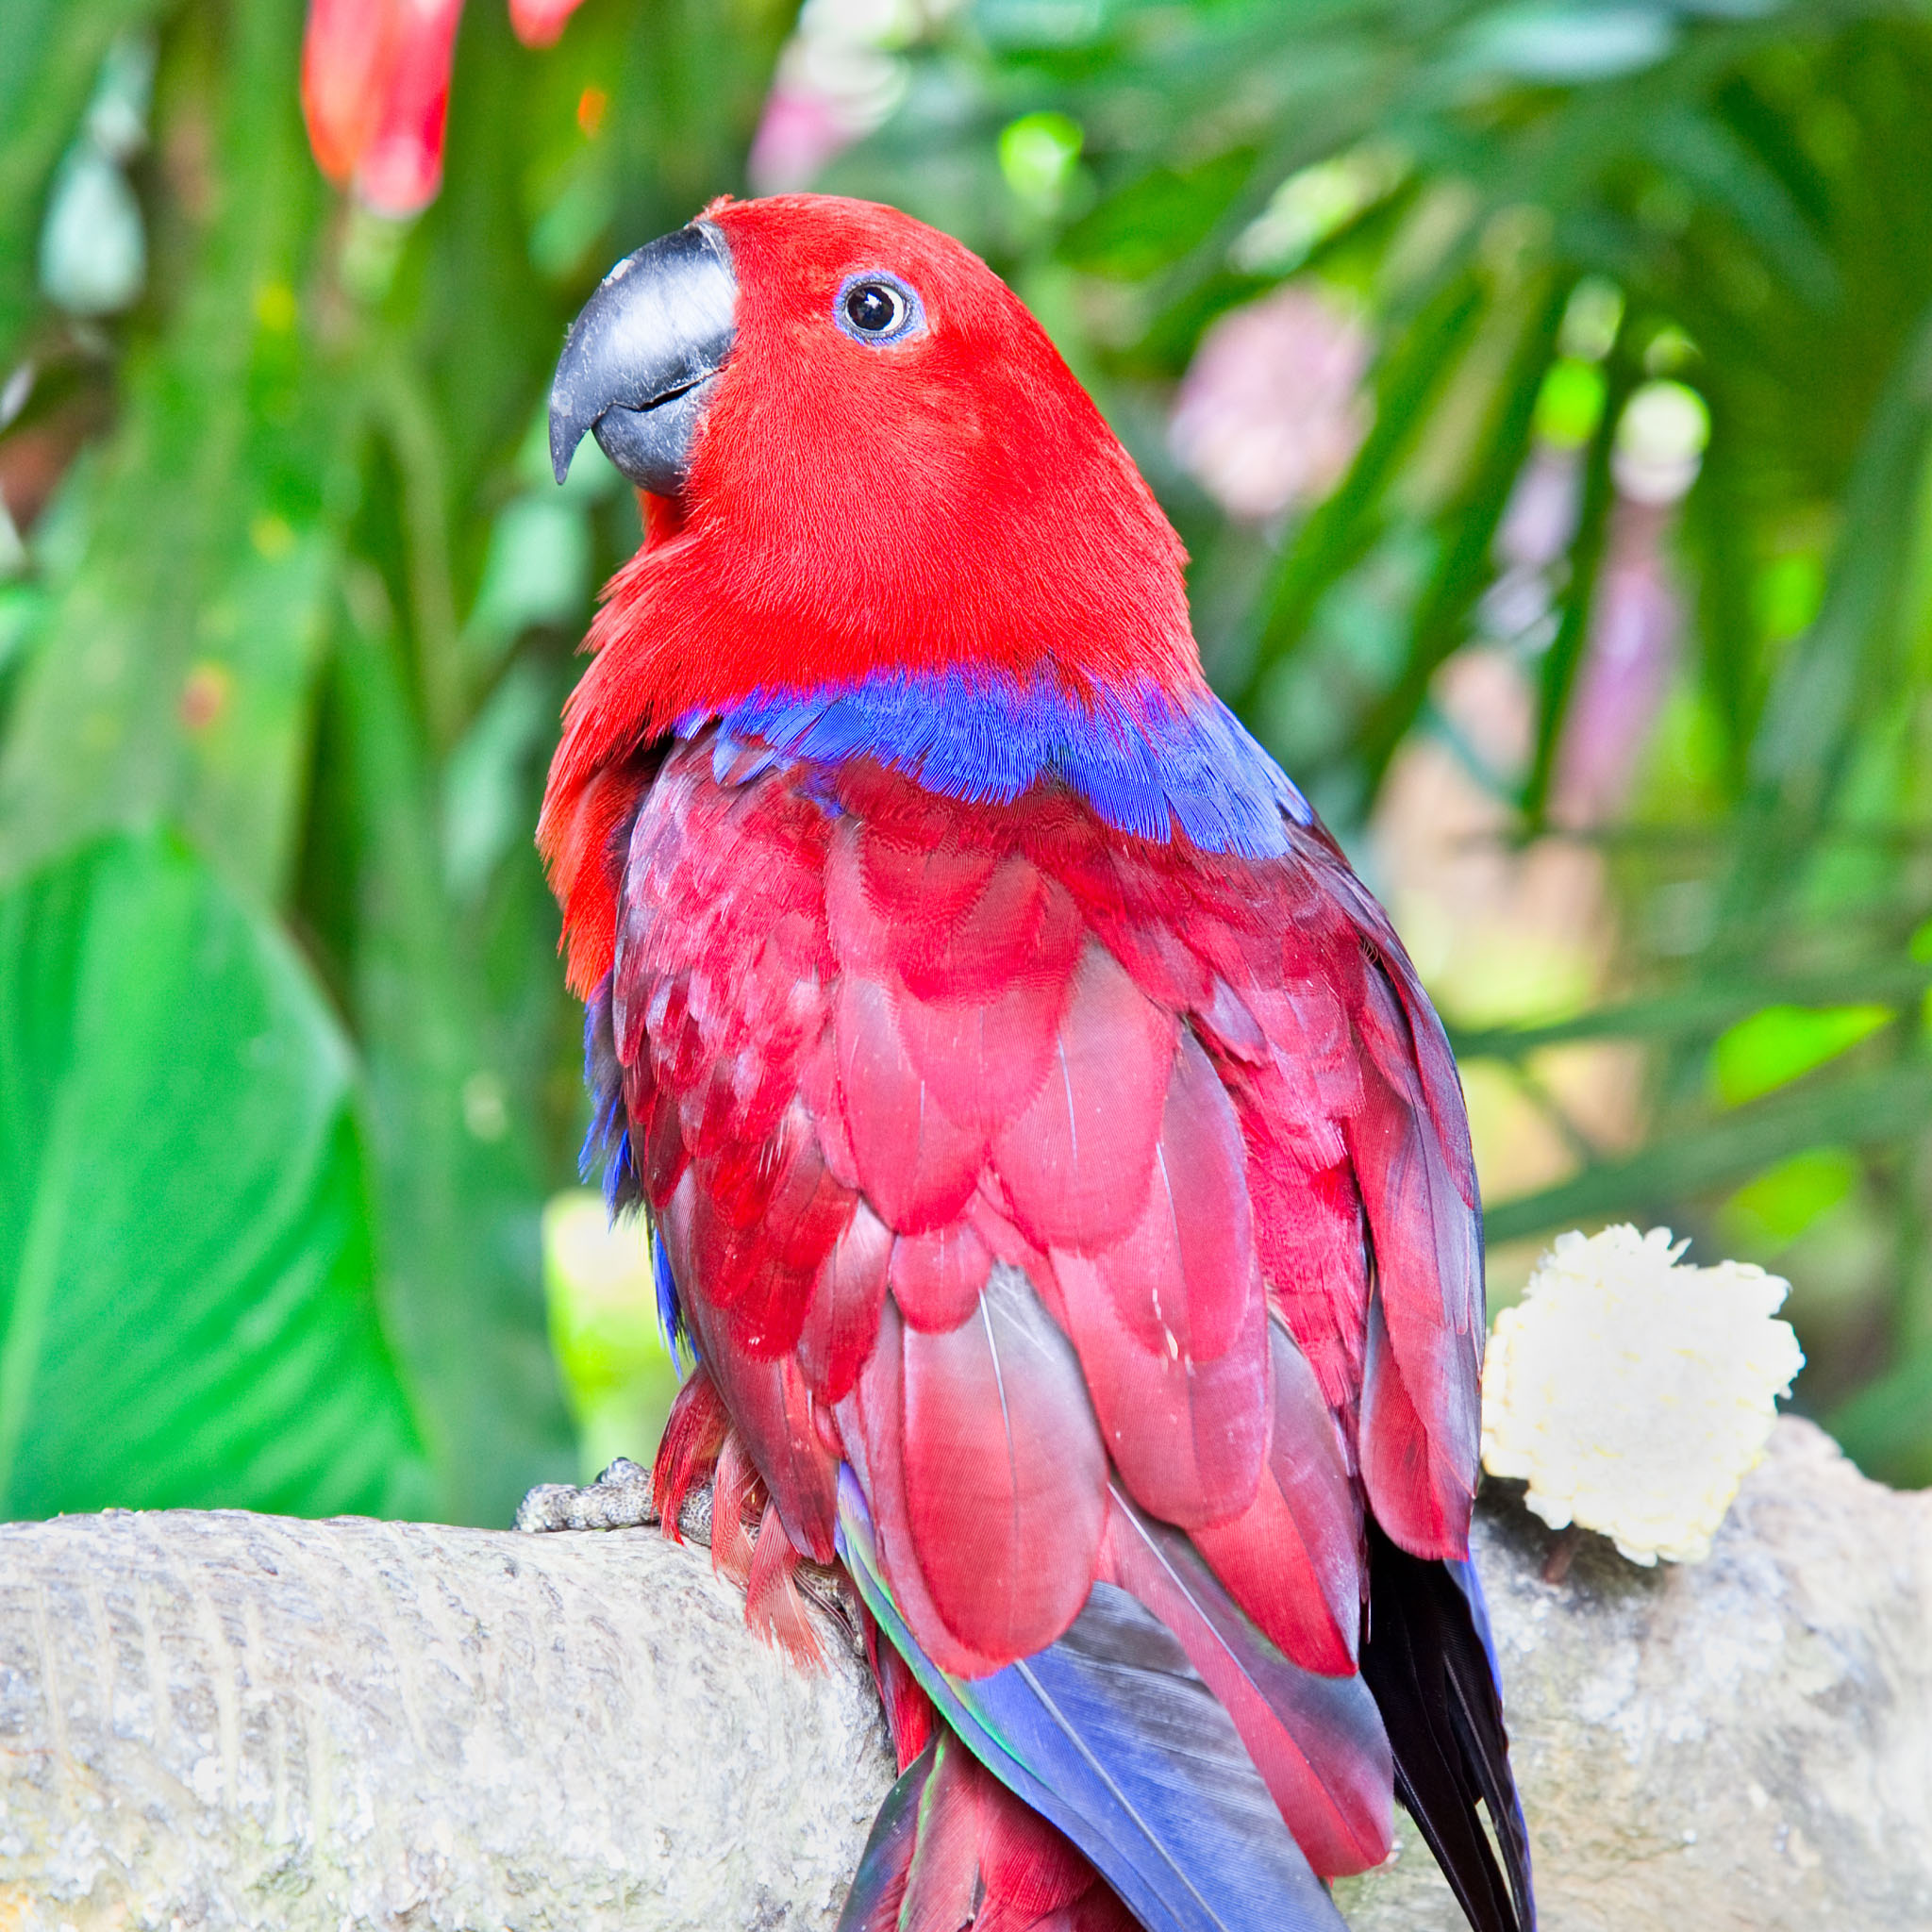 red lory parrot image